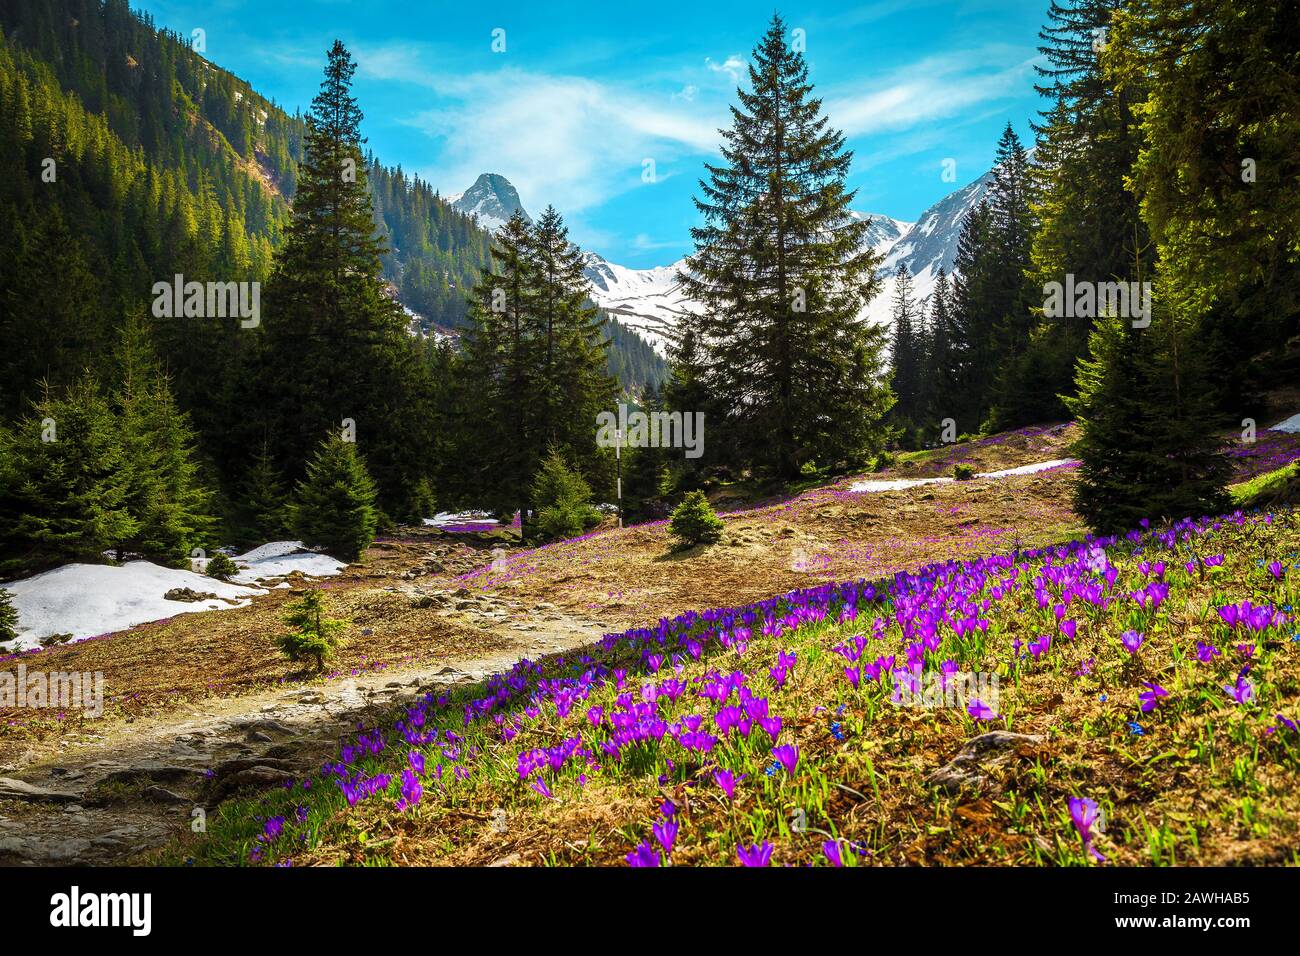 Stunning alpine spring landscape, wonderful forest glade with fresh colorful purple crocus flowers and high snowy mountains in background, Fagaras mou Stock Photo